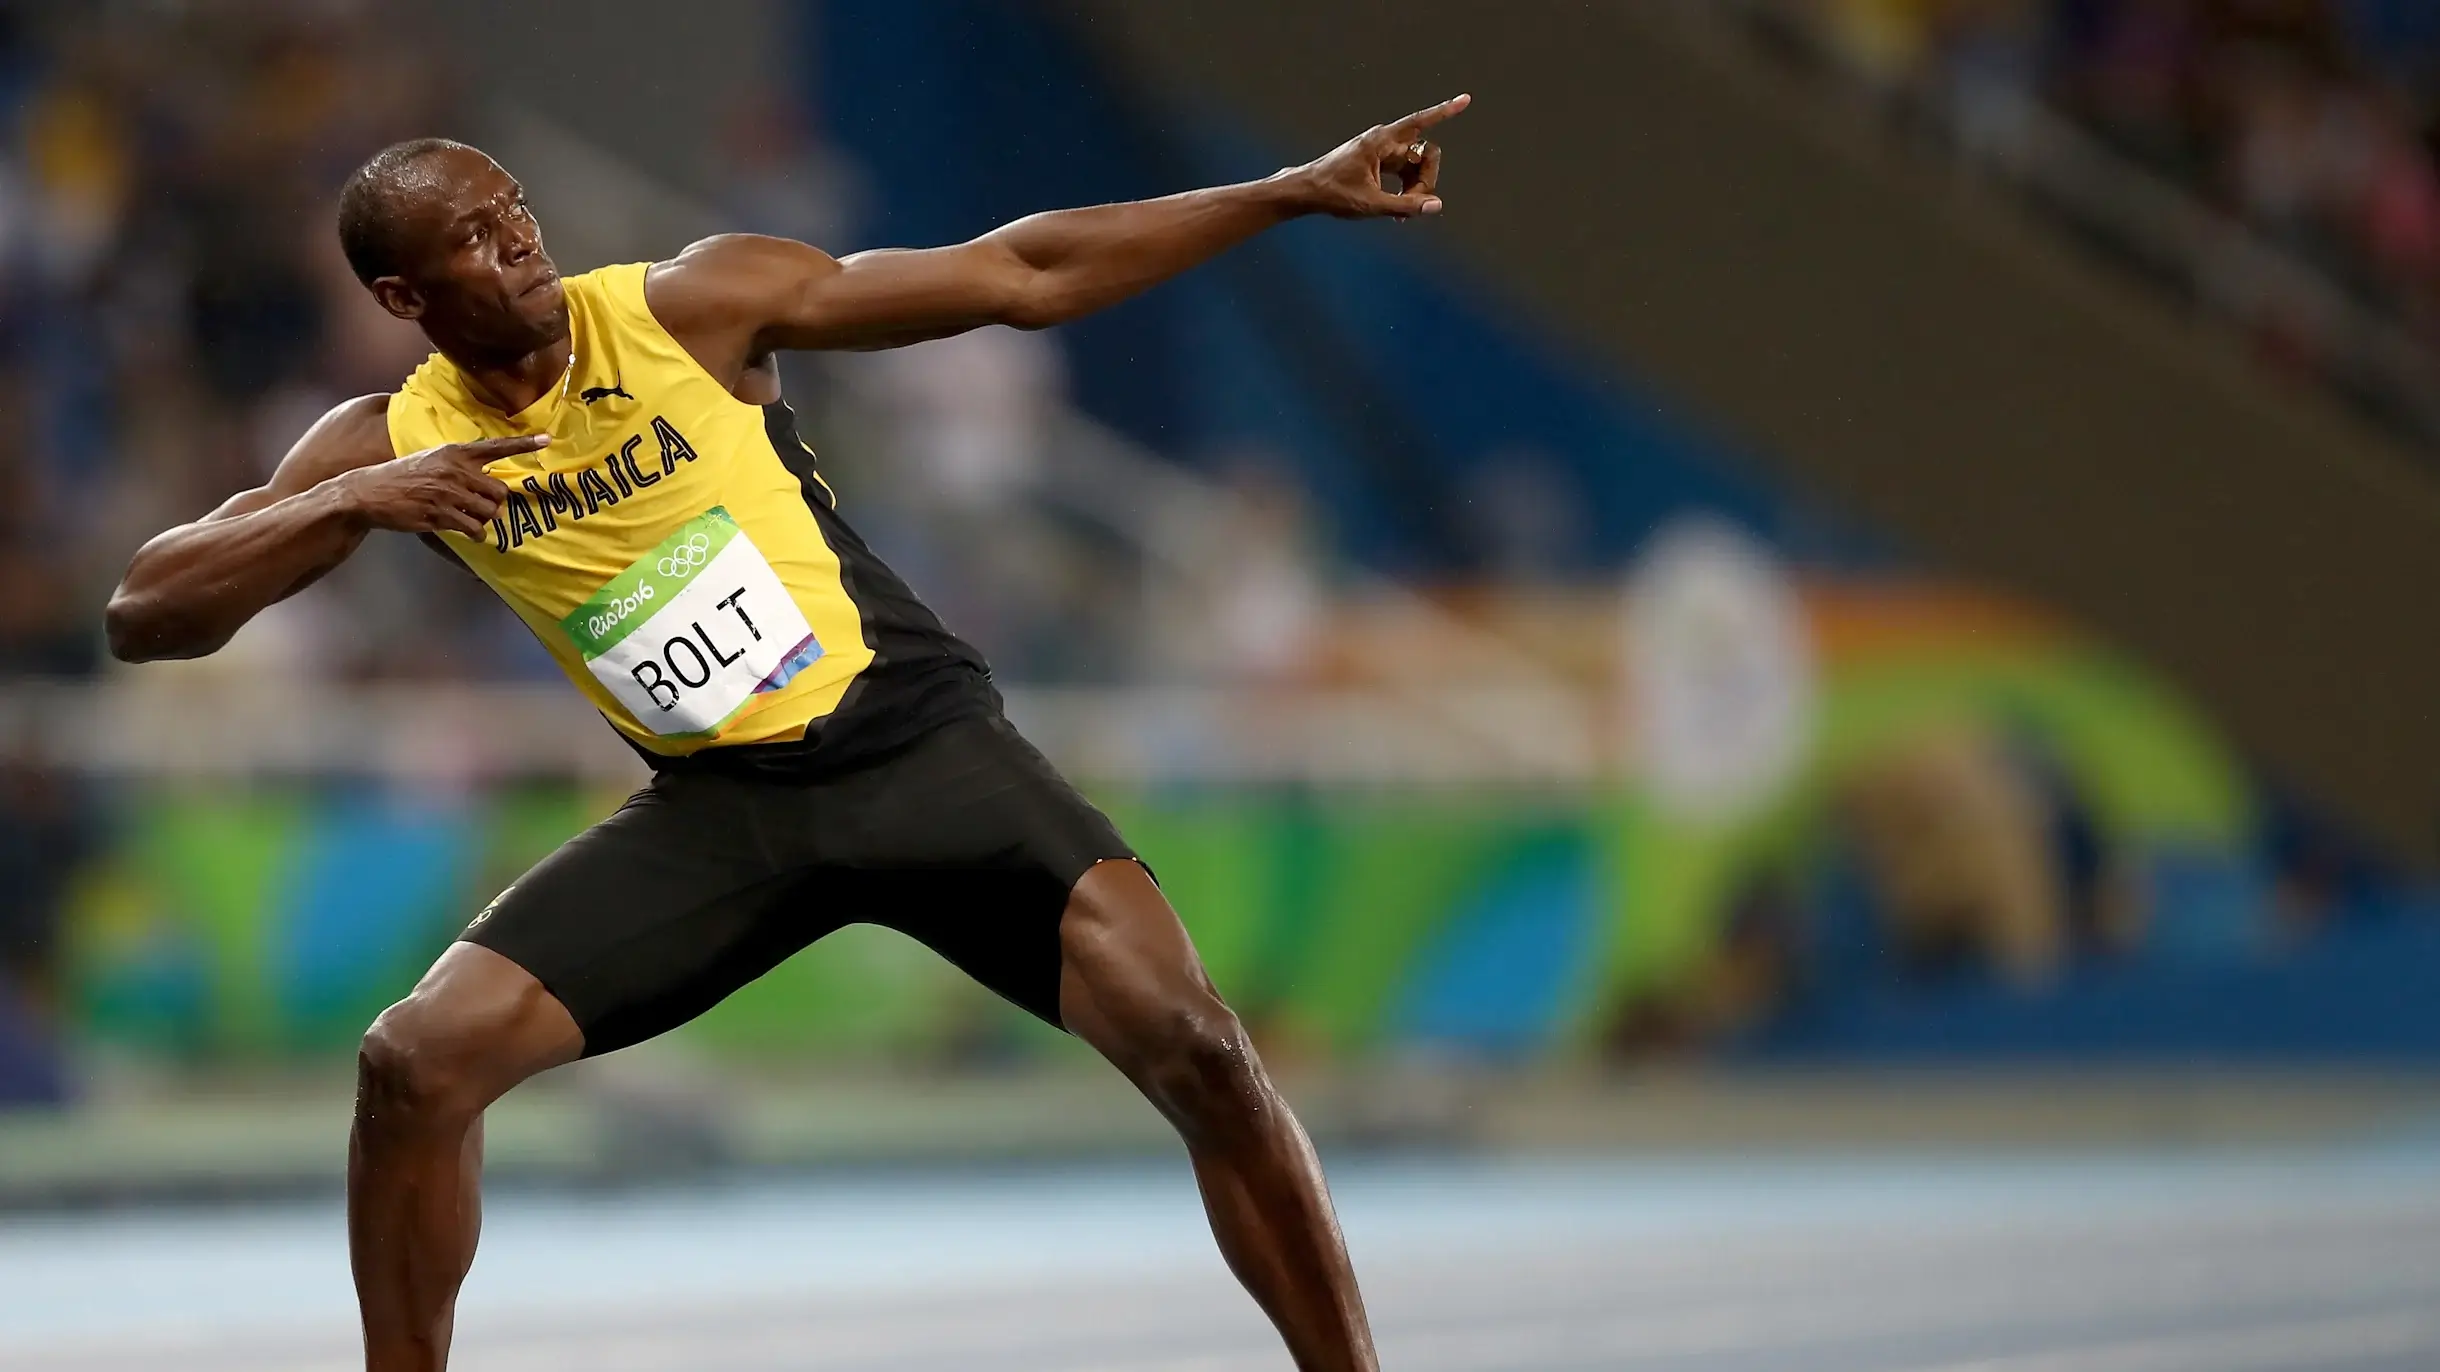 Top 10 Greatest Athletes Of All Time usain bolt - Top 10 Greatest Athletes Of All Time